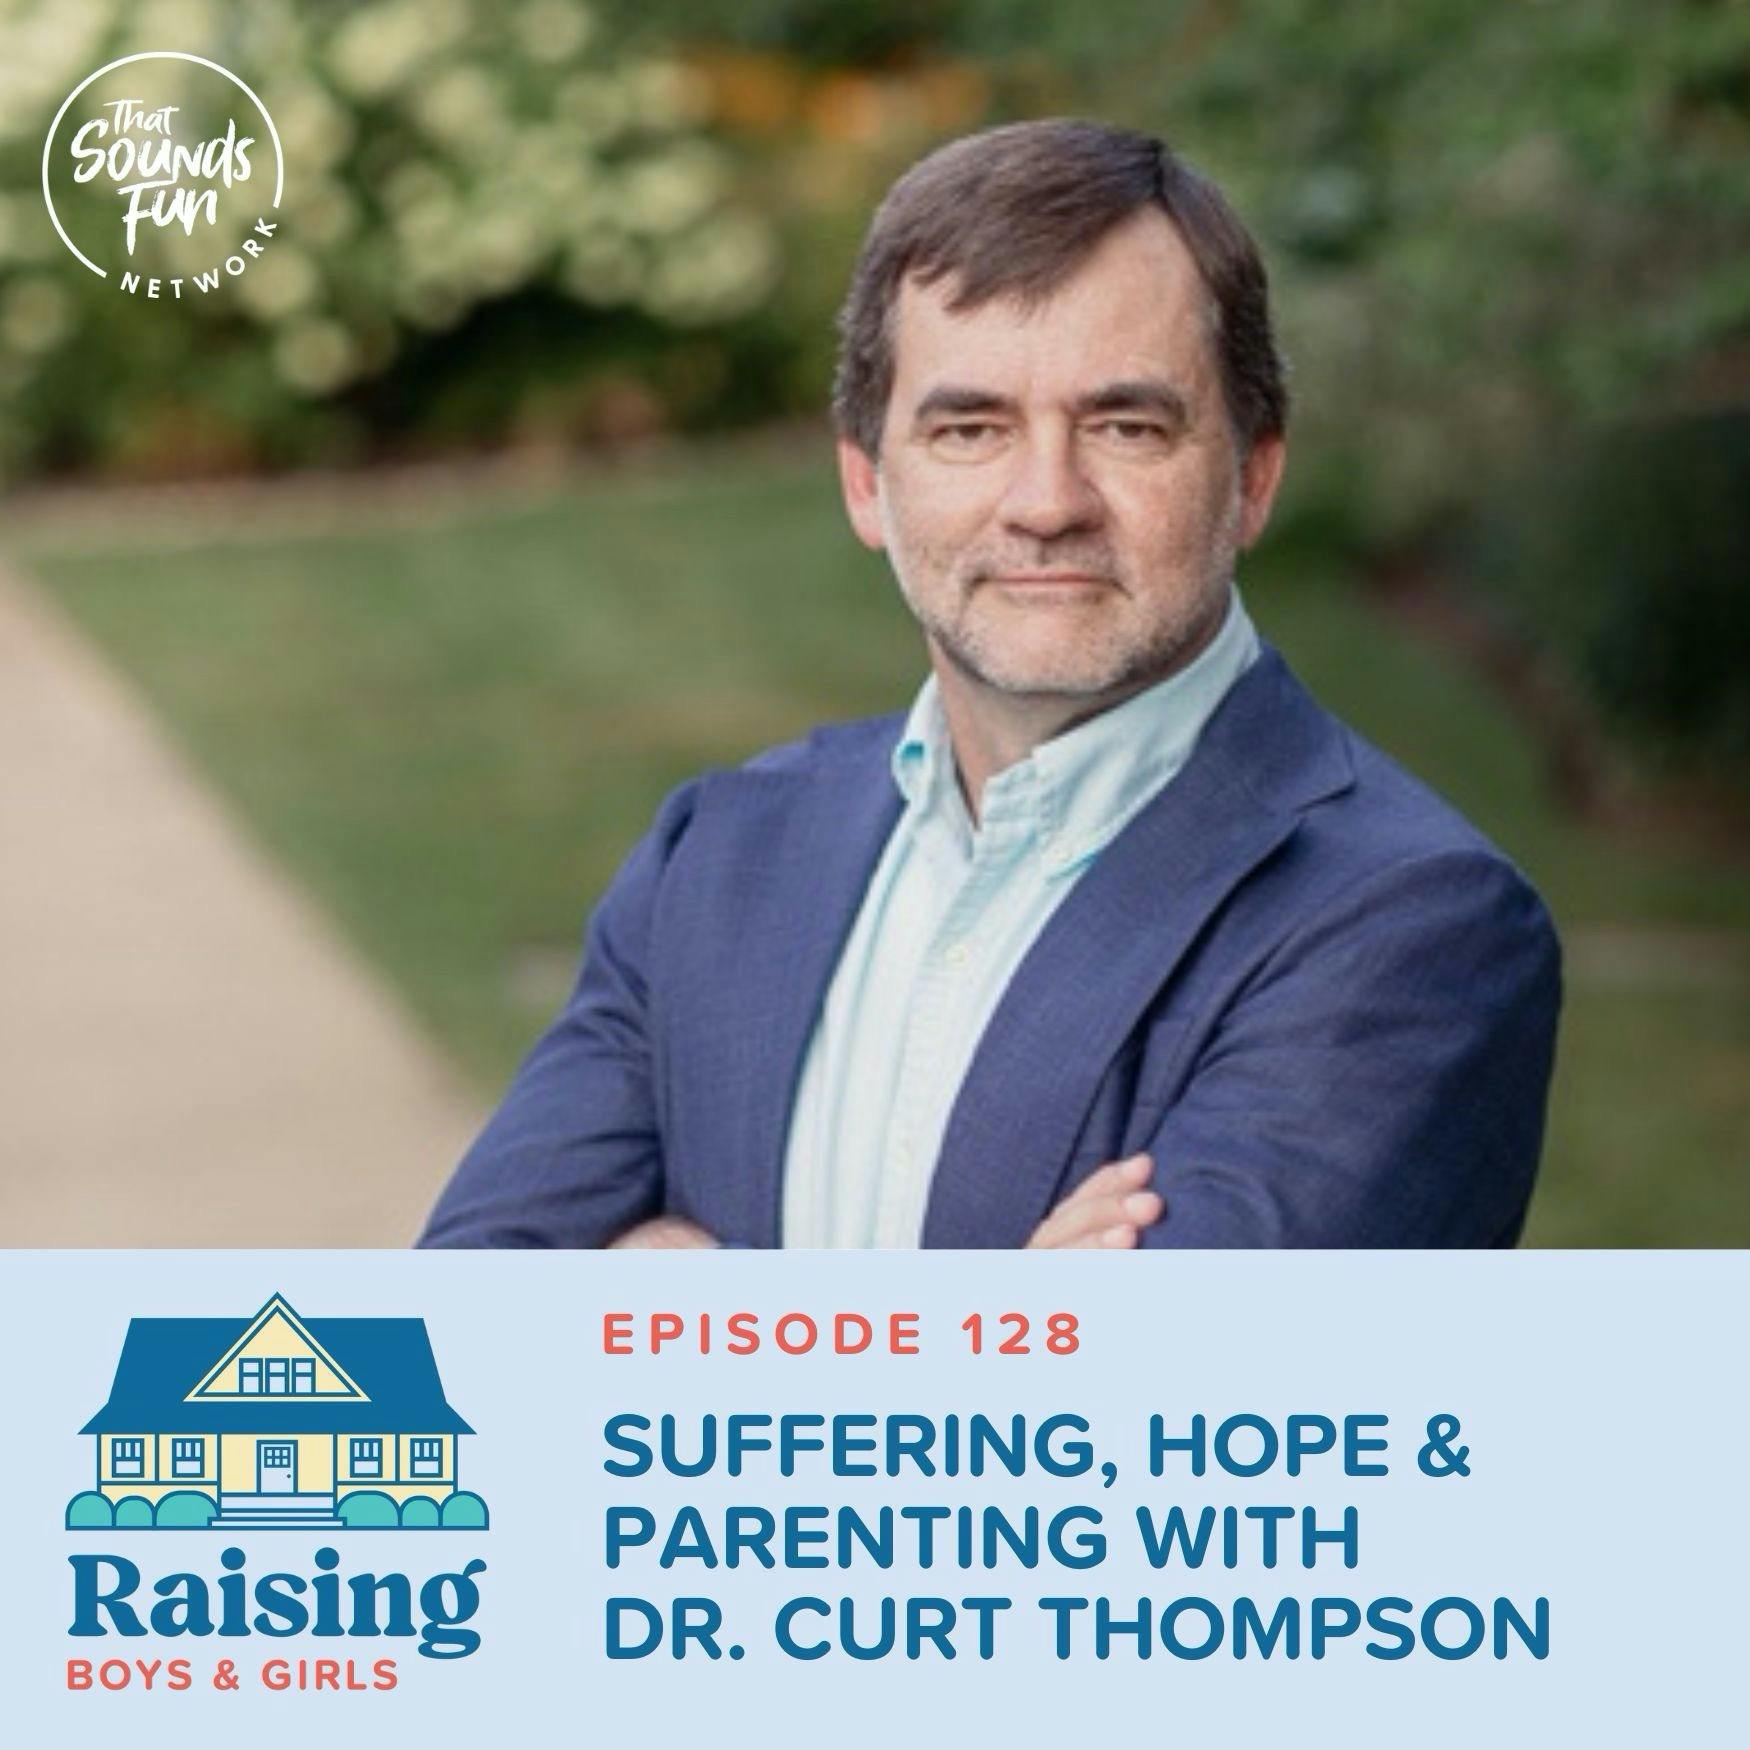 Episode 128: Suffering, Hope & Parenting with Dr. Curt Thompson